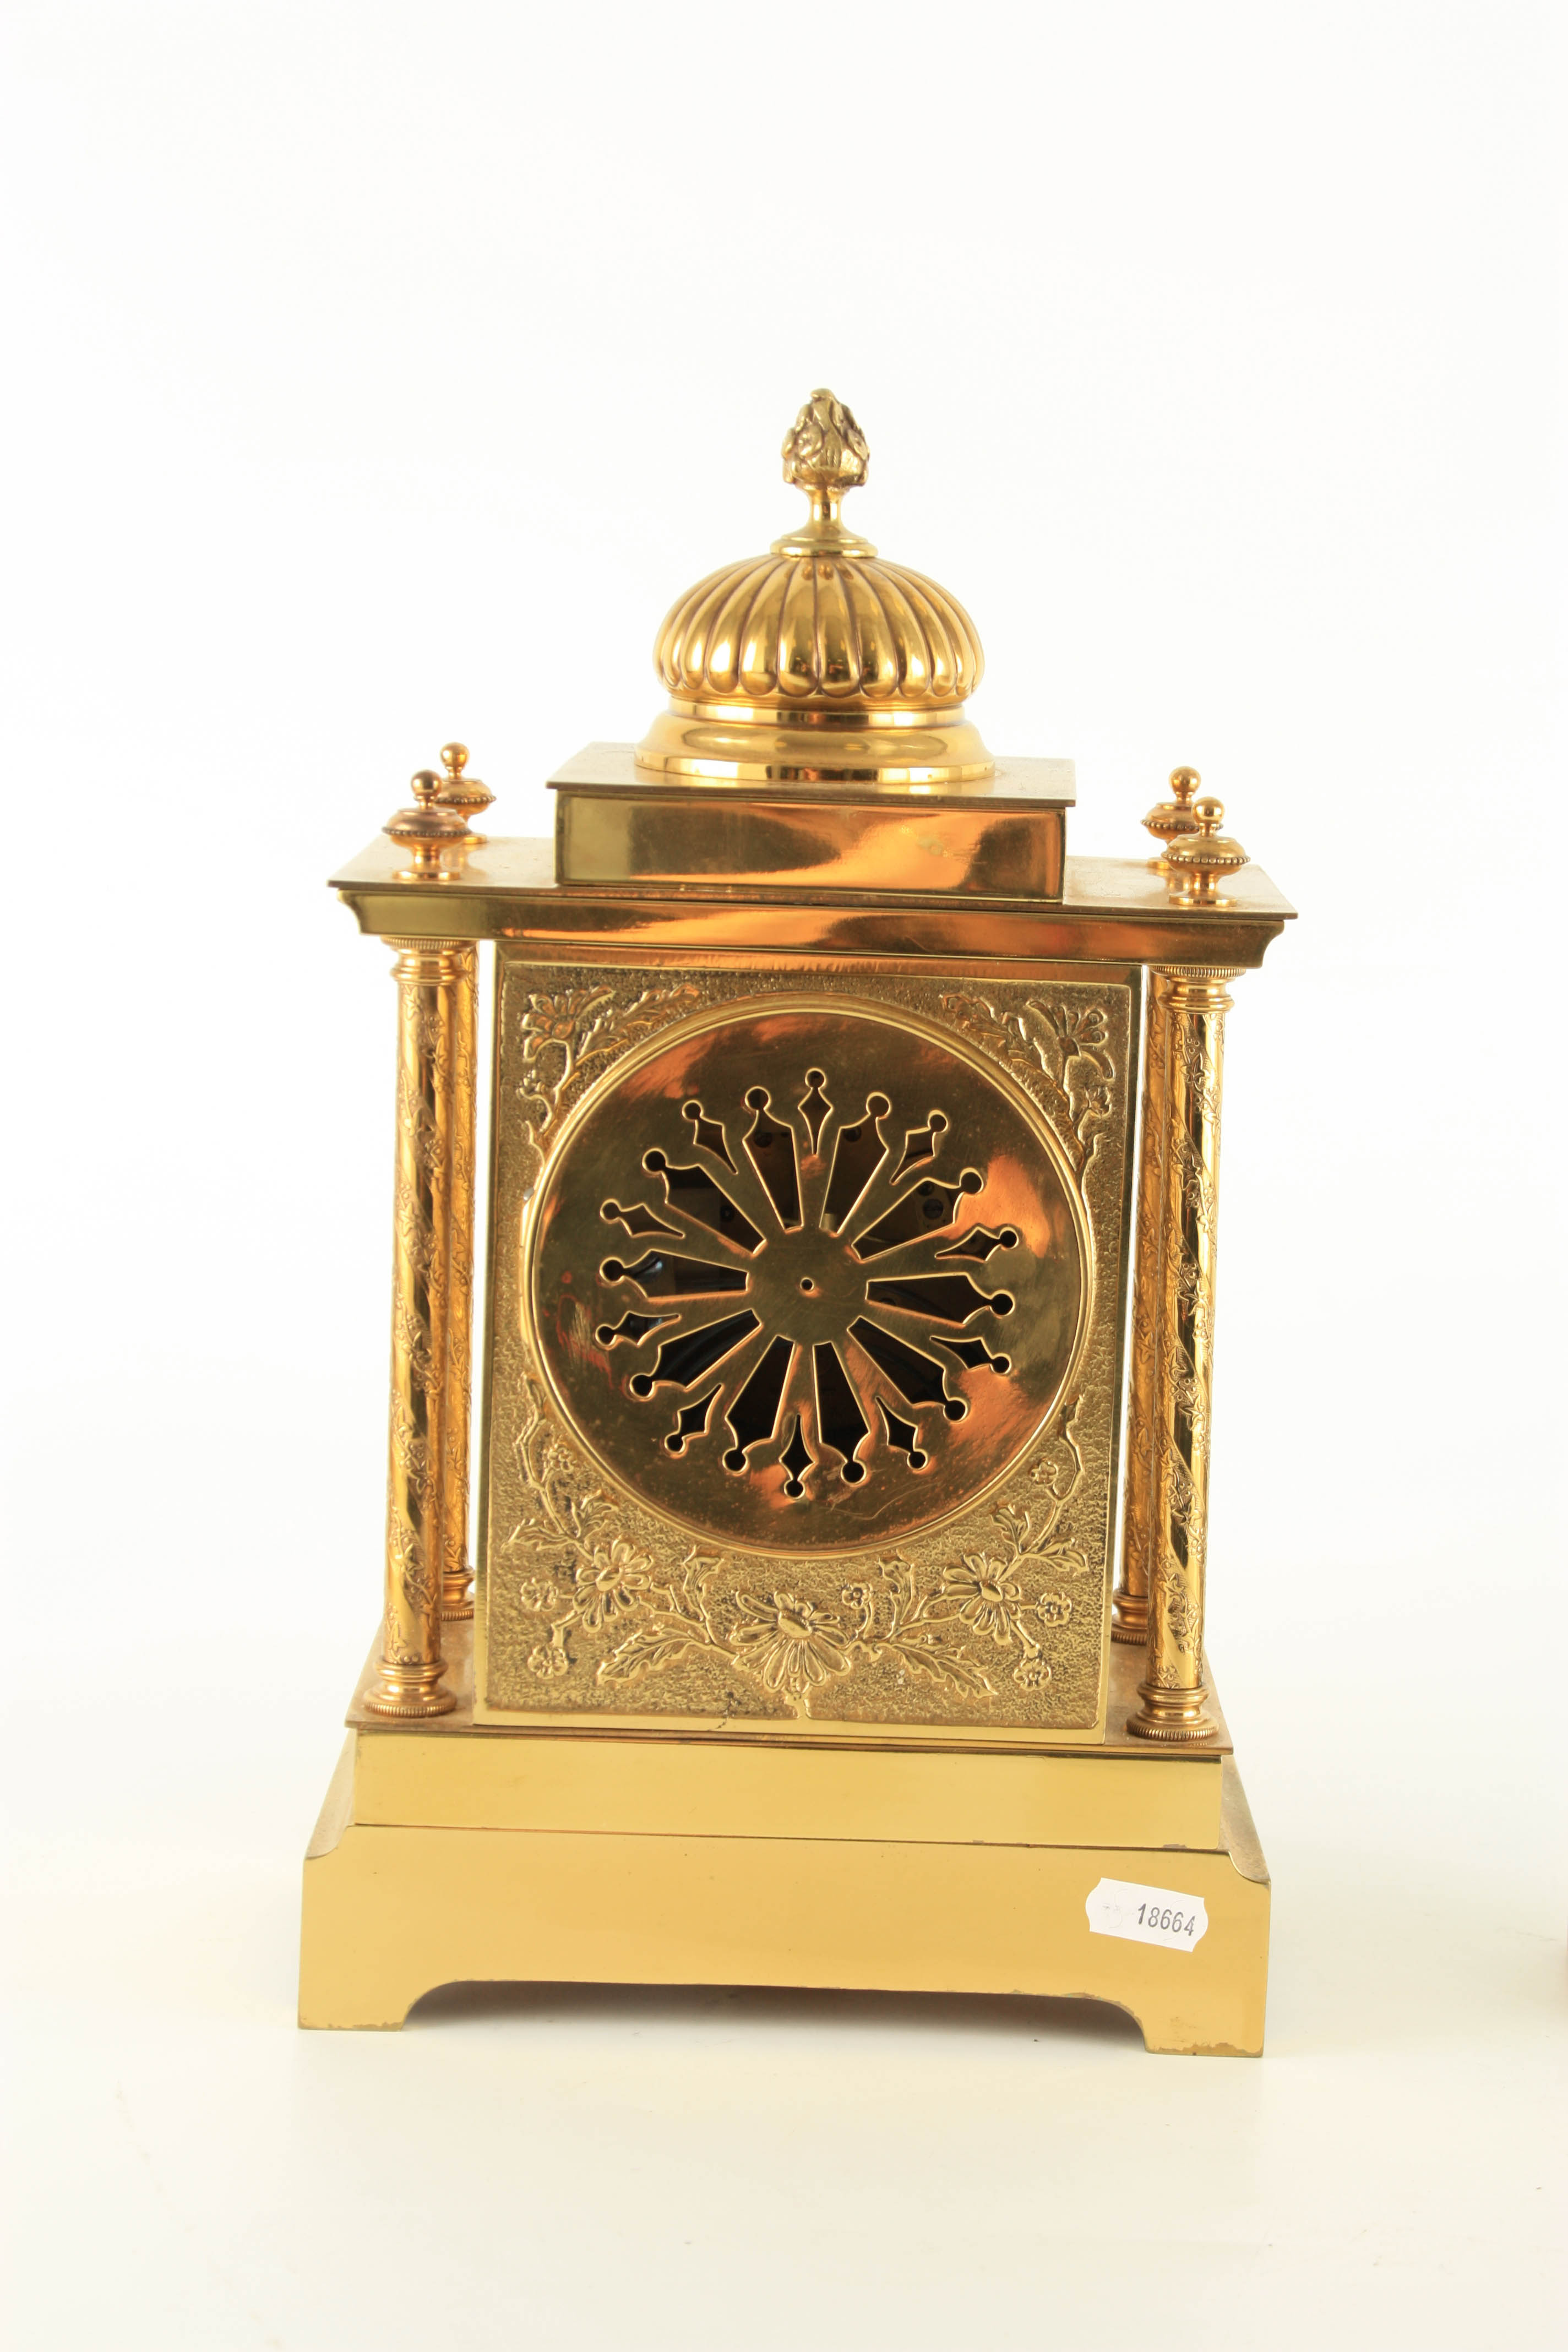 A LATE 19TH CENTURY FRENCH BRASS CASED MANTEL CLOCK having a domed top pediment above a floral - Image 10 of 12